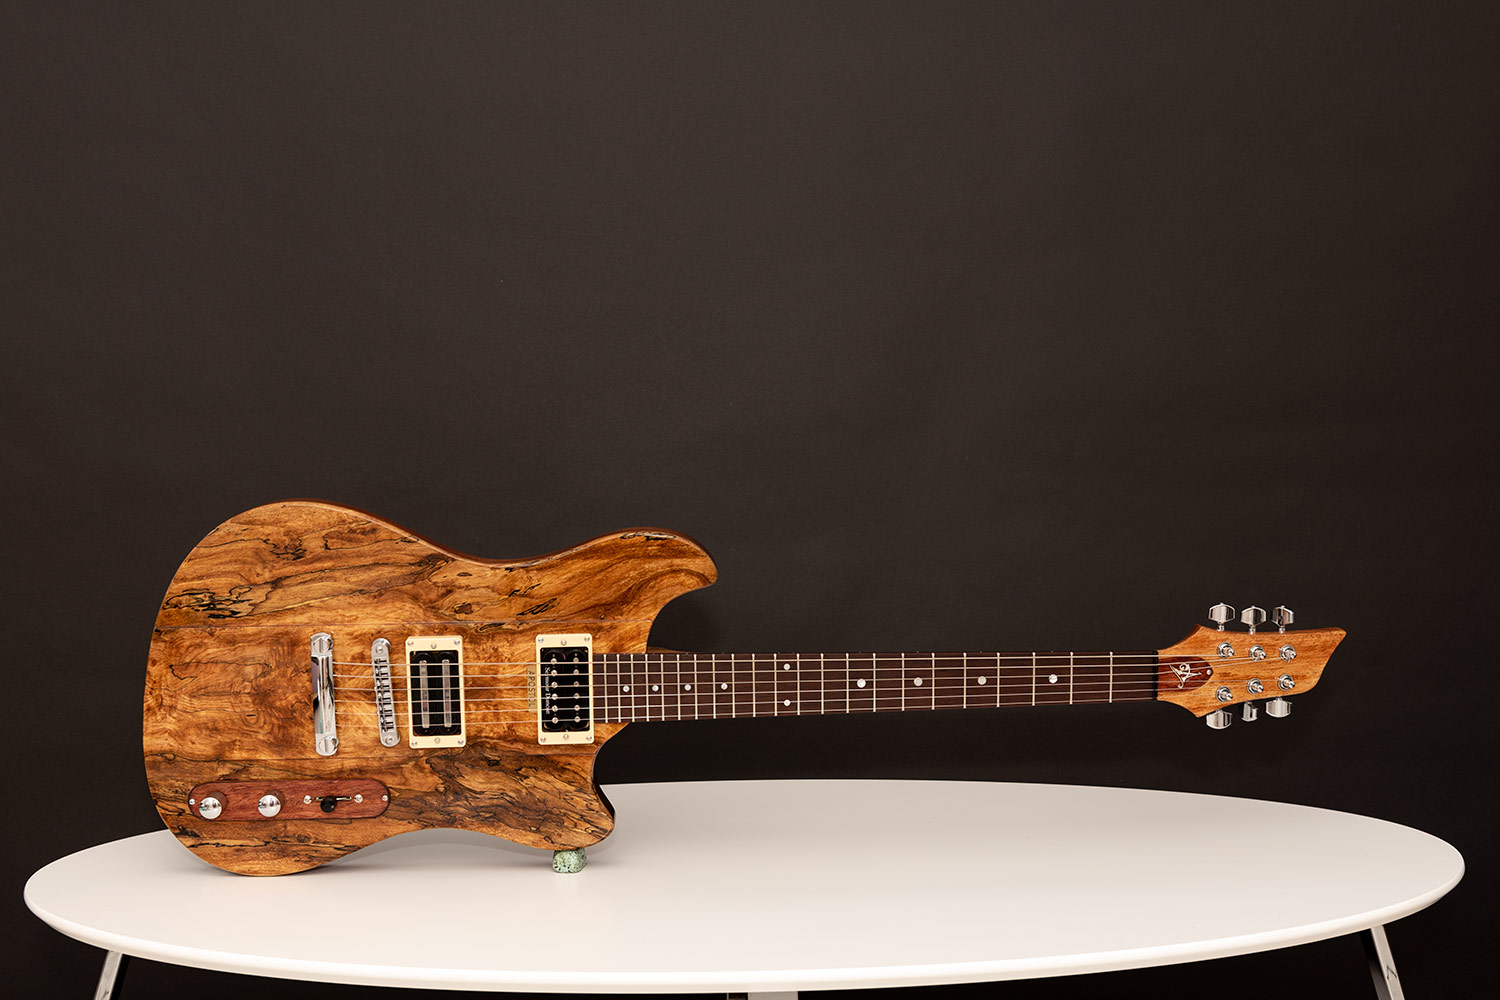 This guitar is called The Alchemist - Augustin is a luthier with over 15 years of experience, specializing in custom guitars